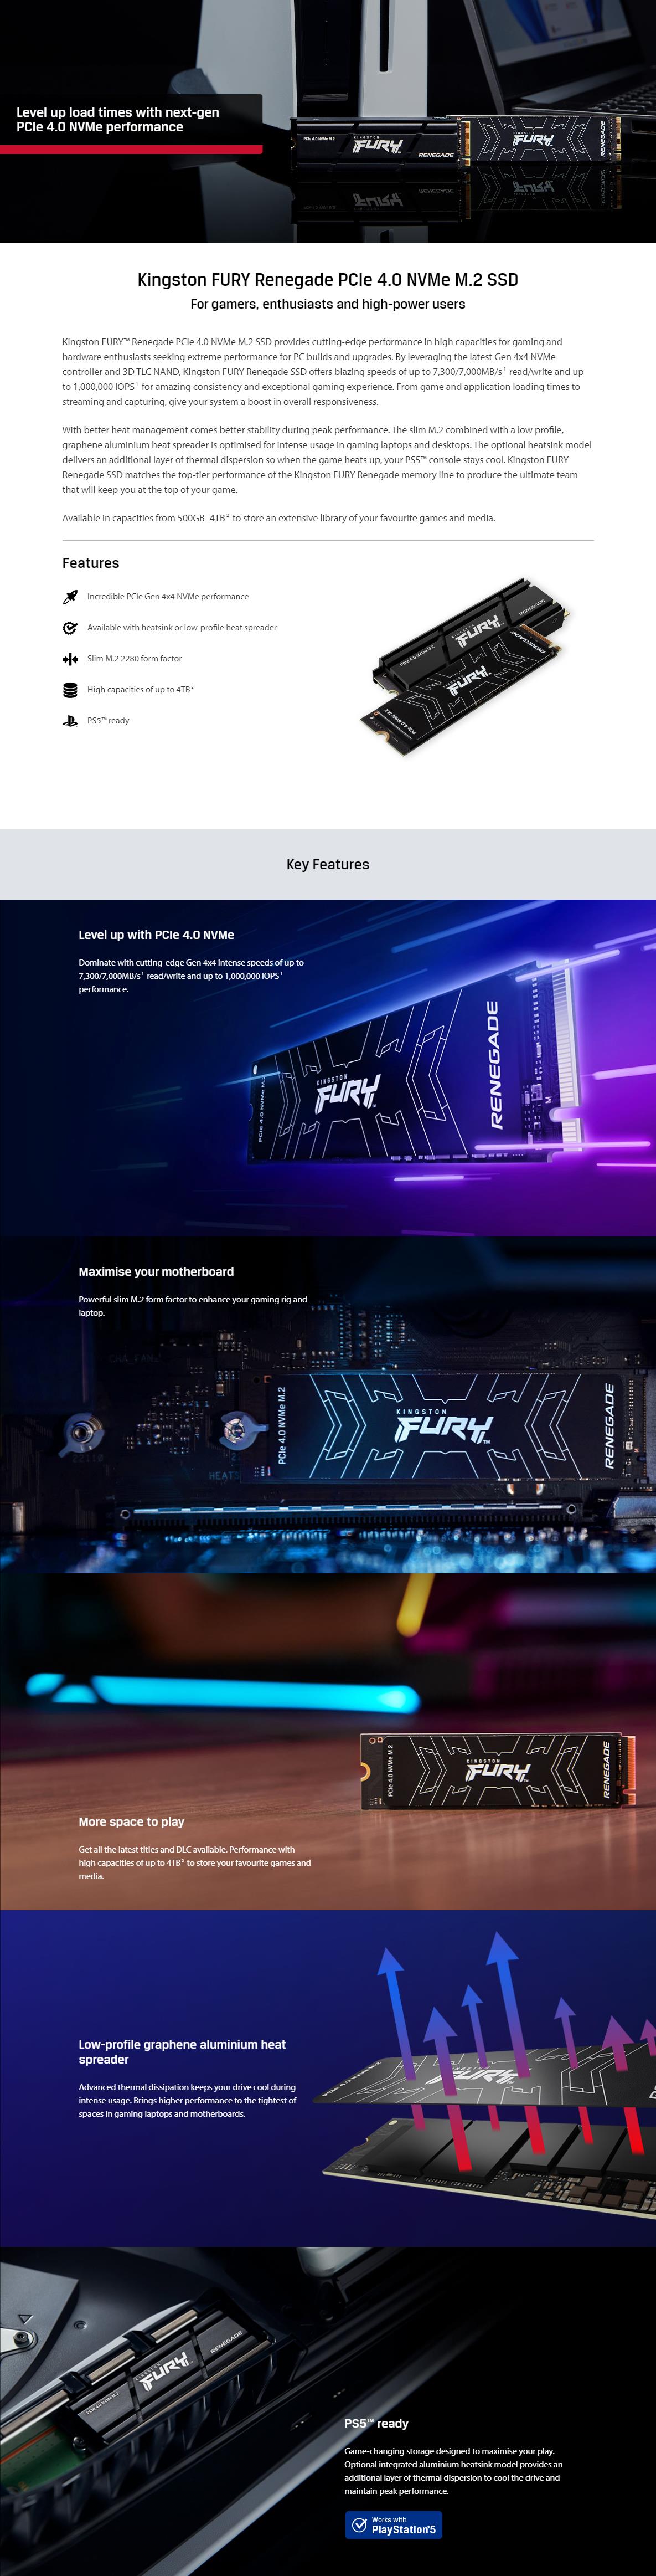 A large marketing image providing additional information about the product Kingston FURY Renegade w/Heatsink PCIe Gen4 NVMe M.2 SSD - 1TB - Additional alt info not provided